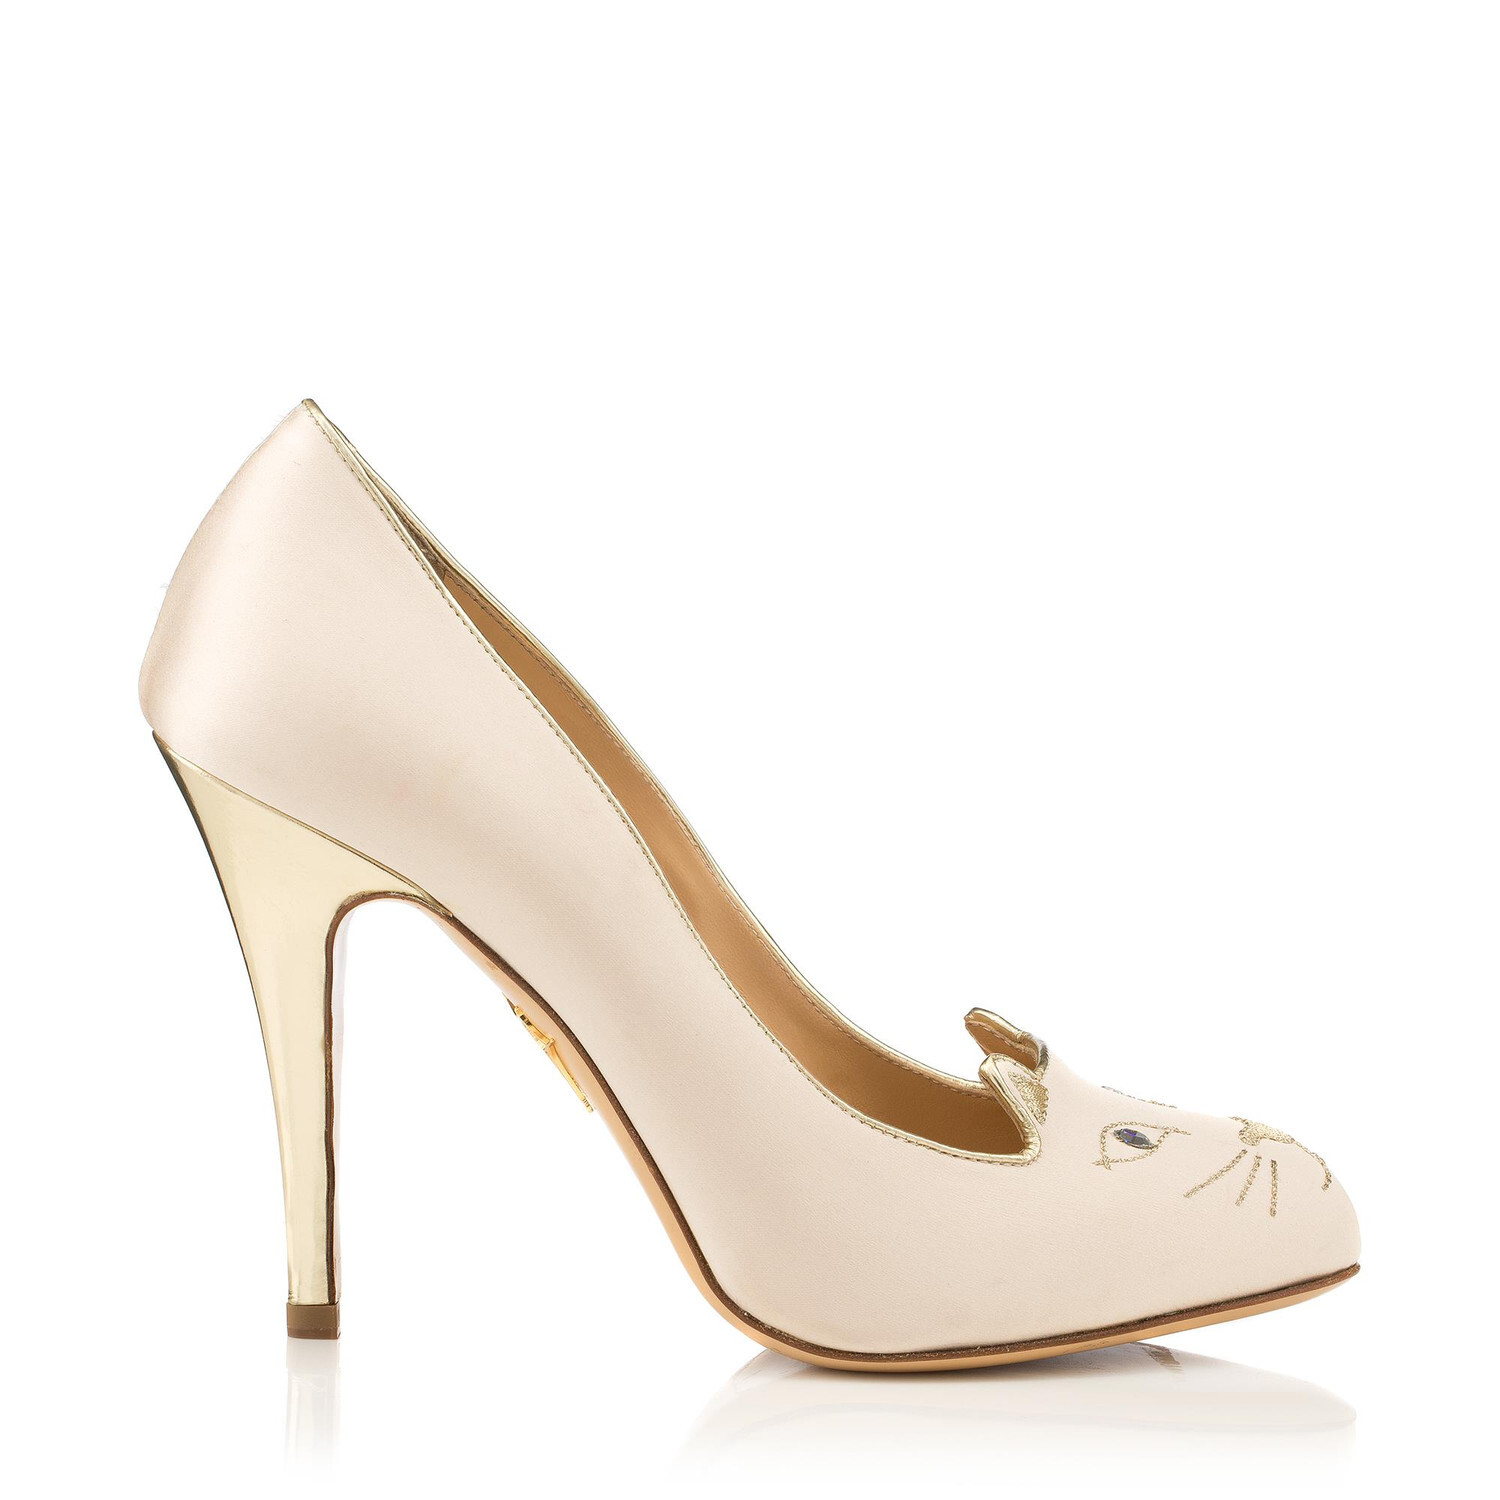 Charlotte Olympia Wedding Shoes | hitched.co.uk